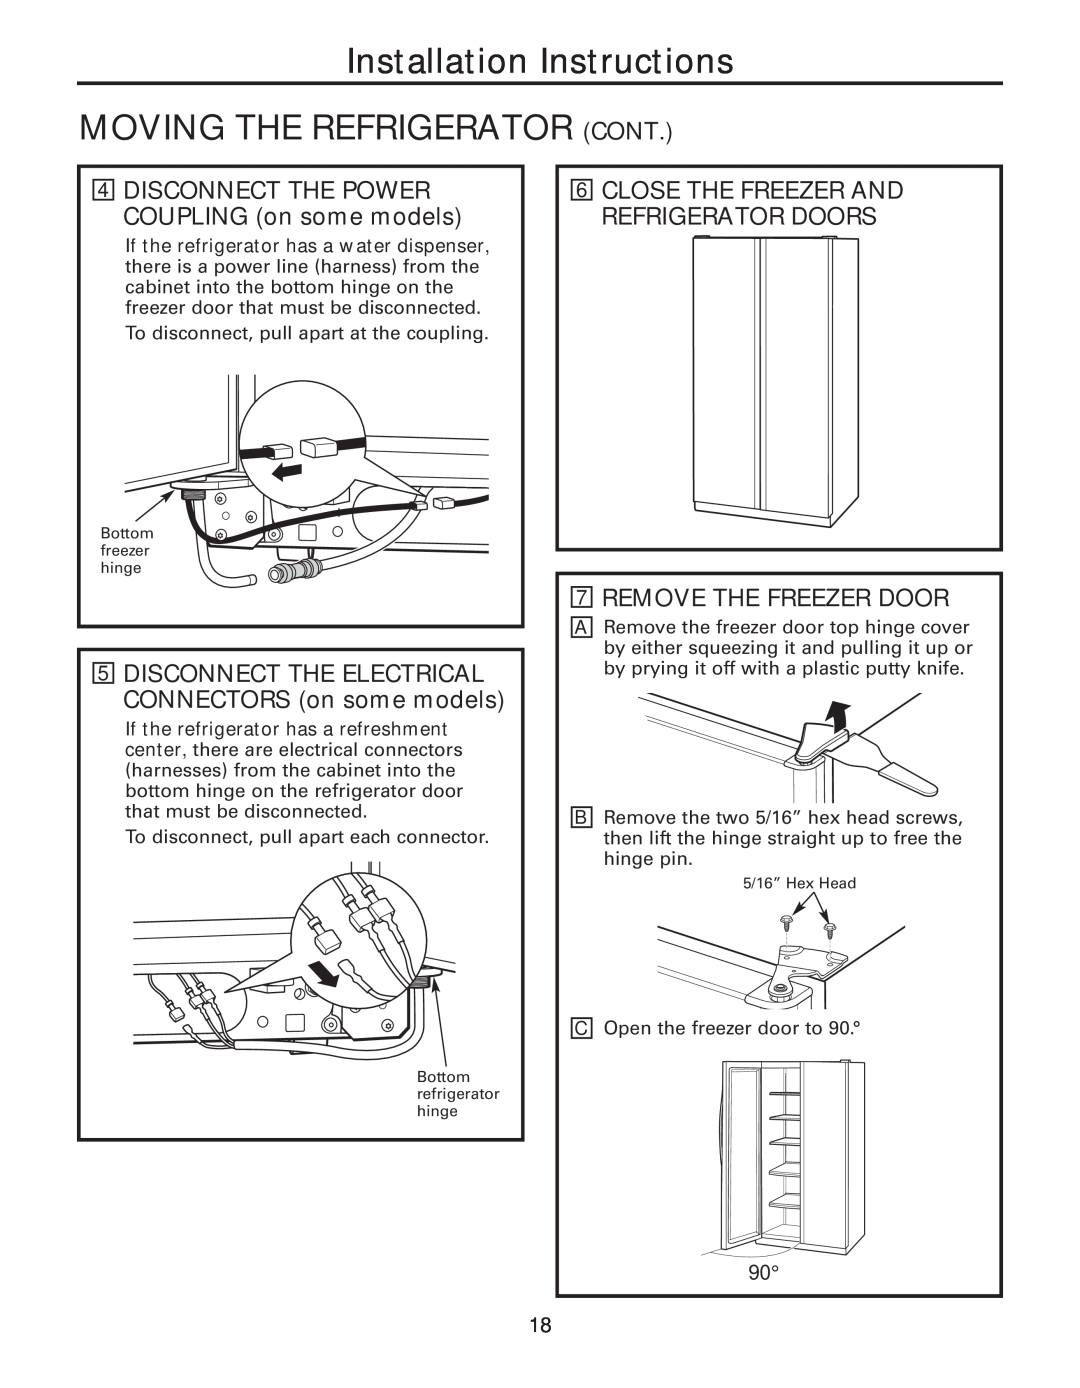 GE 200D8074P044 installation instructions Installation Instructions, Moving The Refrigerator Cont, 7REMOVE THE FREEZER DOOR 